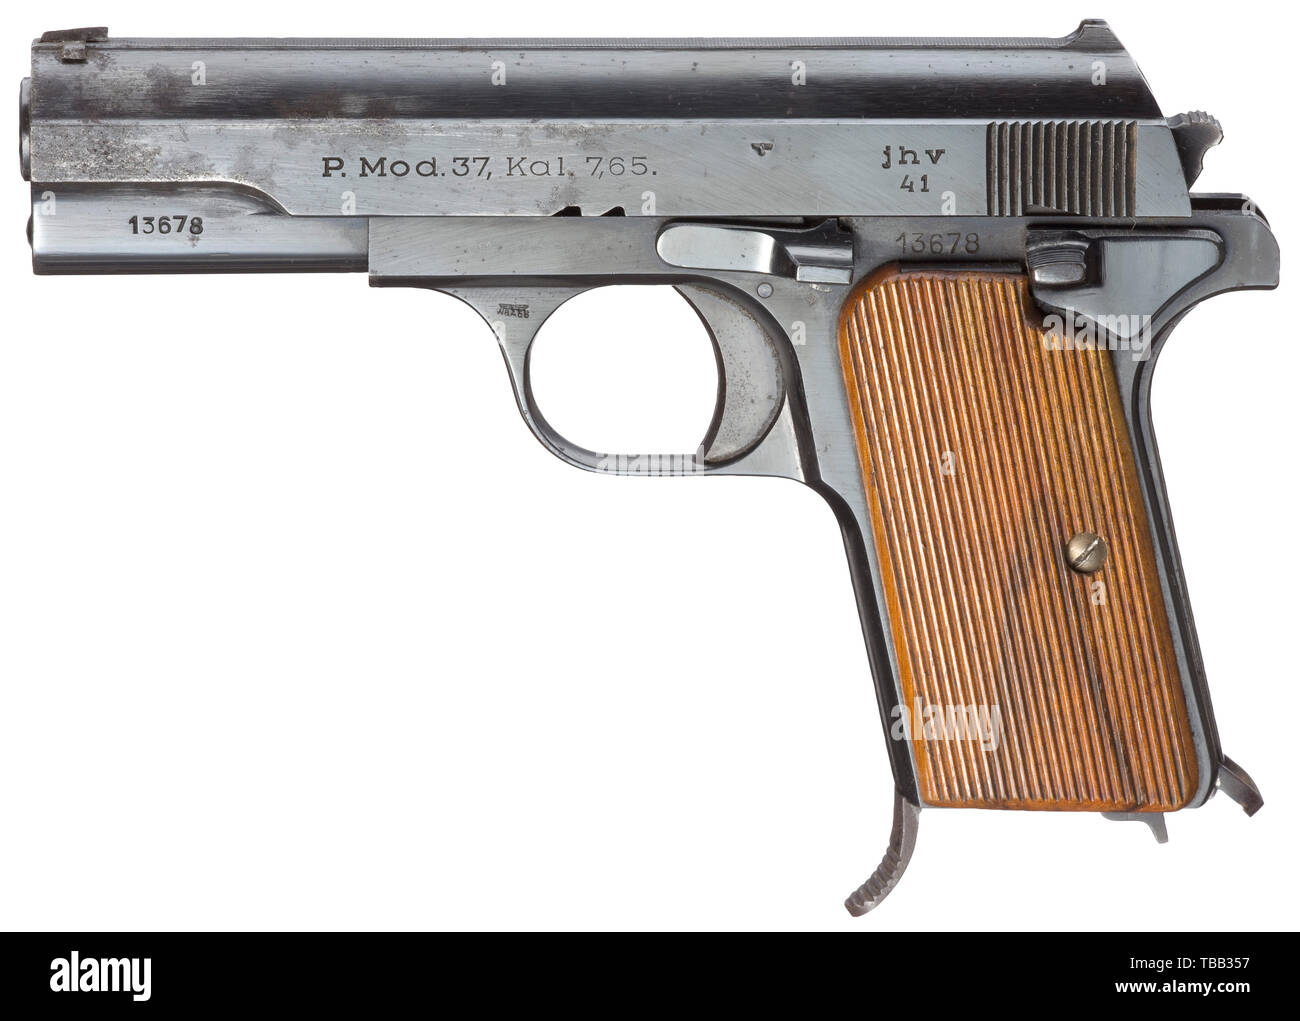 Small Arms Pistols Femaru M1937 Caliber 7 65 Mm Jhv 41 Issued To German Air Force Luftwaffe Editorial Use Only Stock Photo Alamy